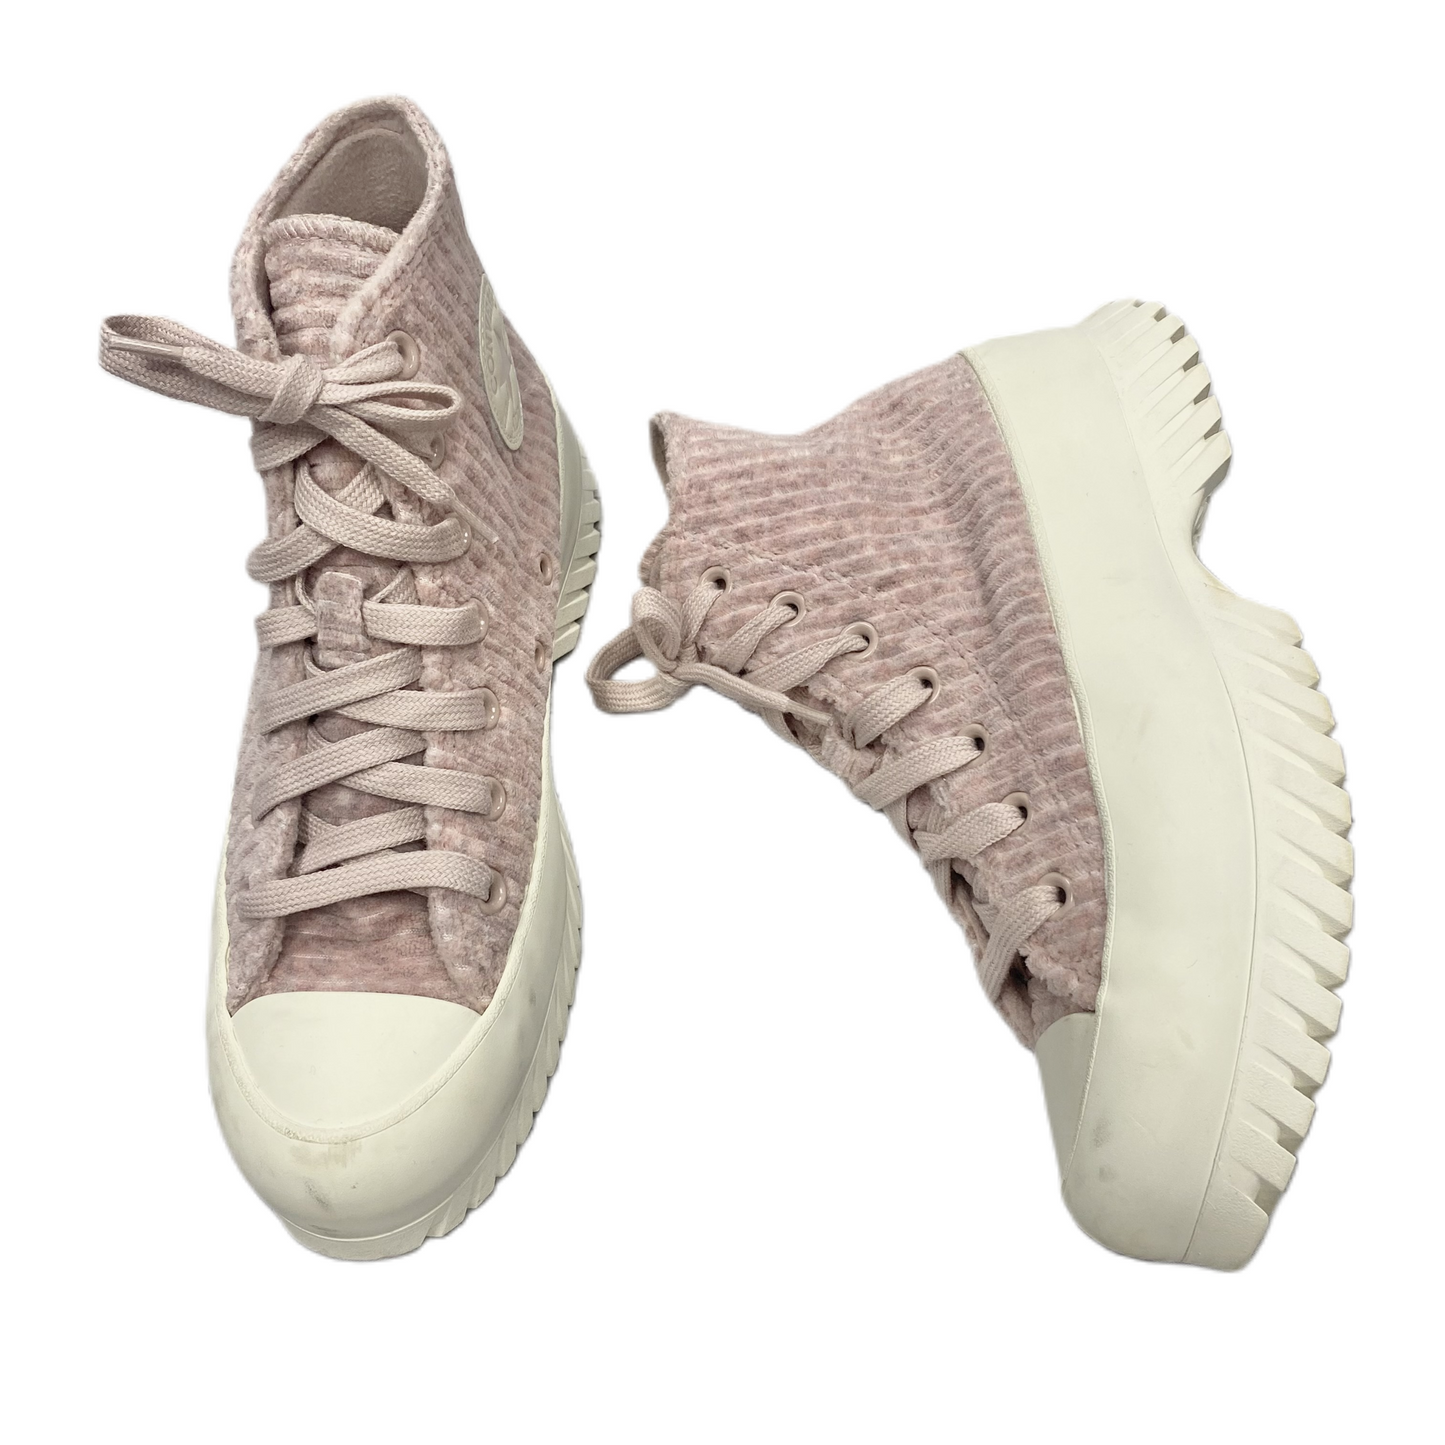 Pink & White Shoes Sneakers By Converse, Size: 7